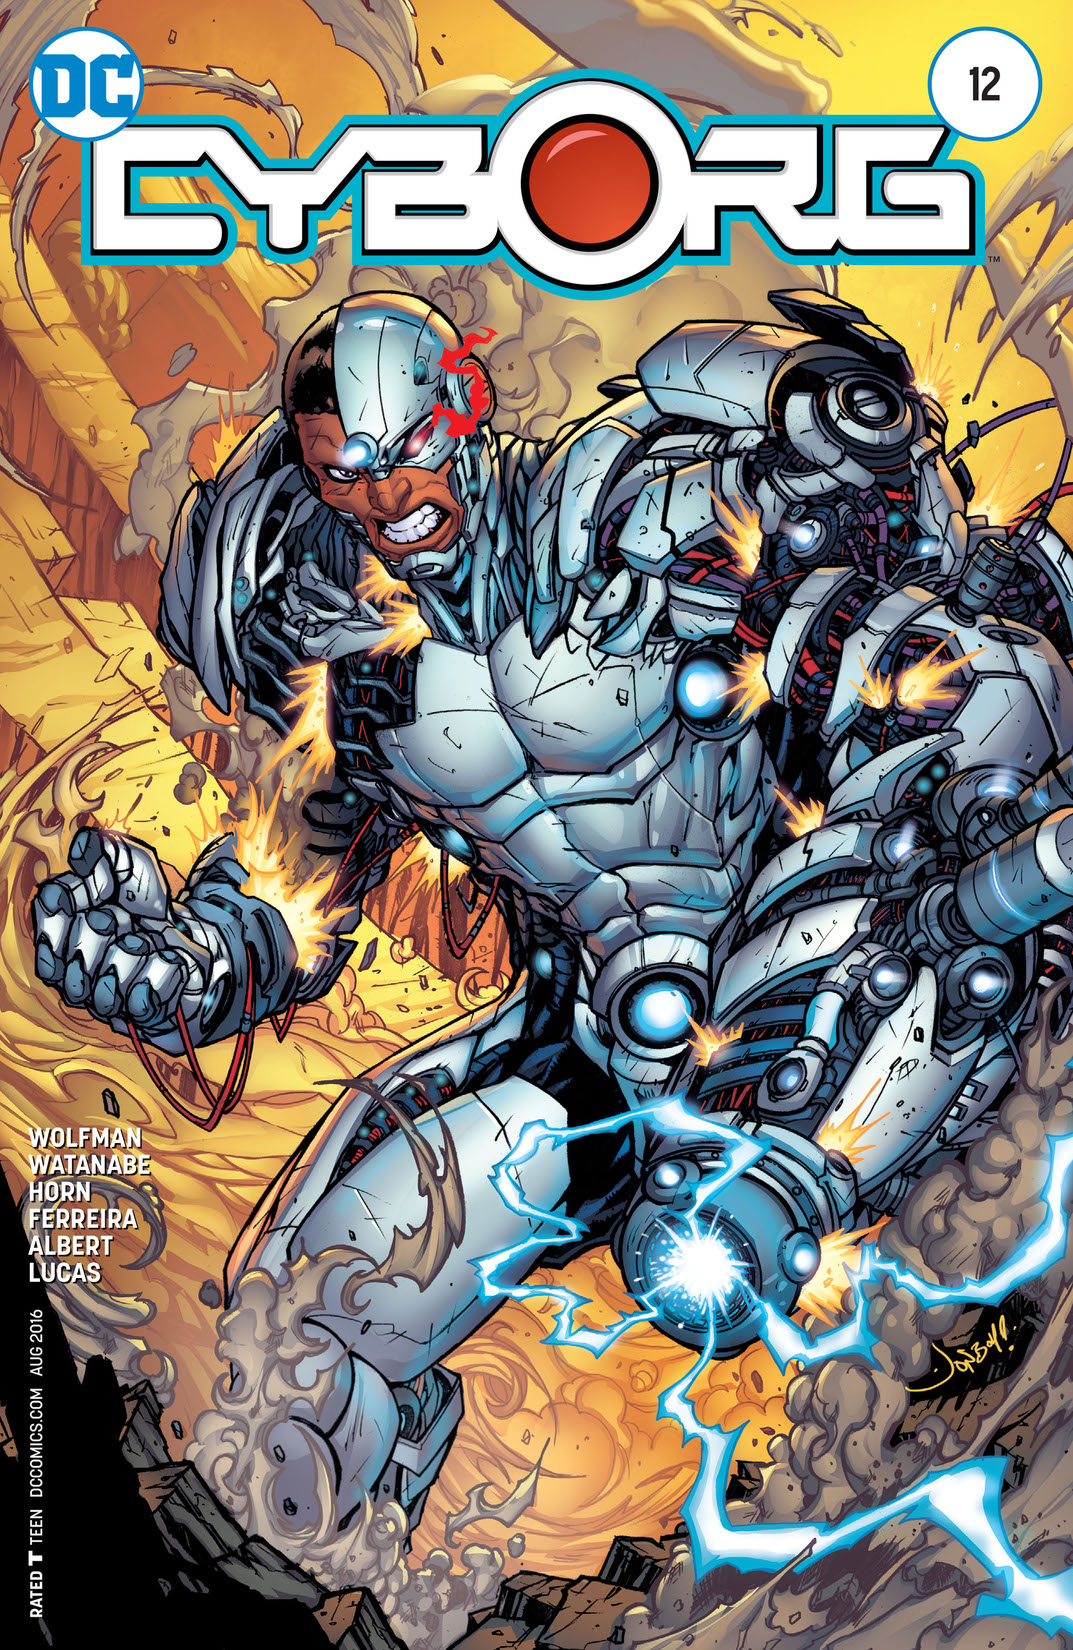 Cyborg (2015-) #12 preview images